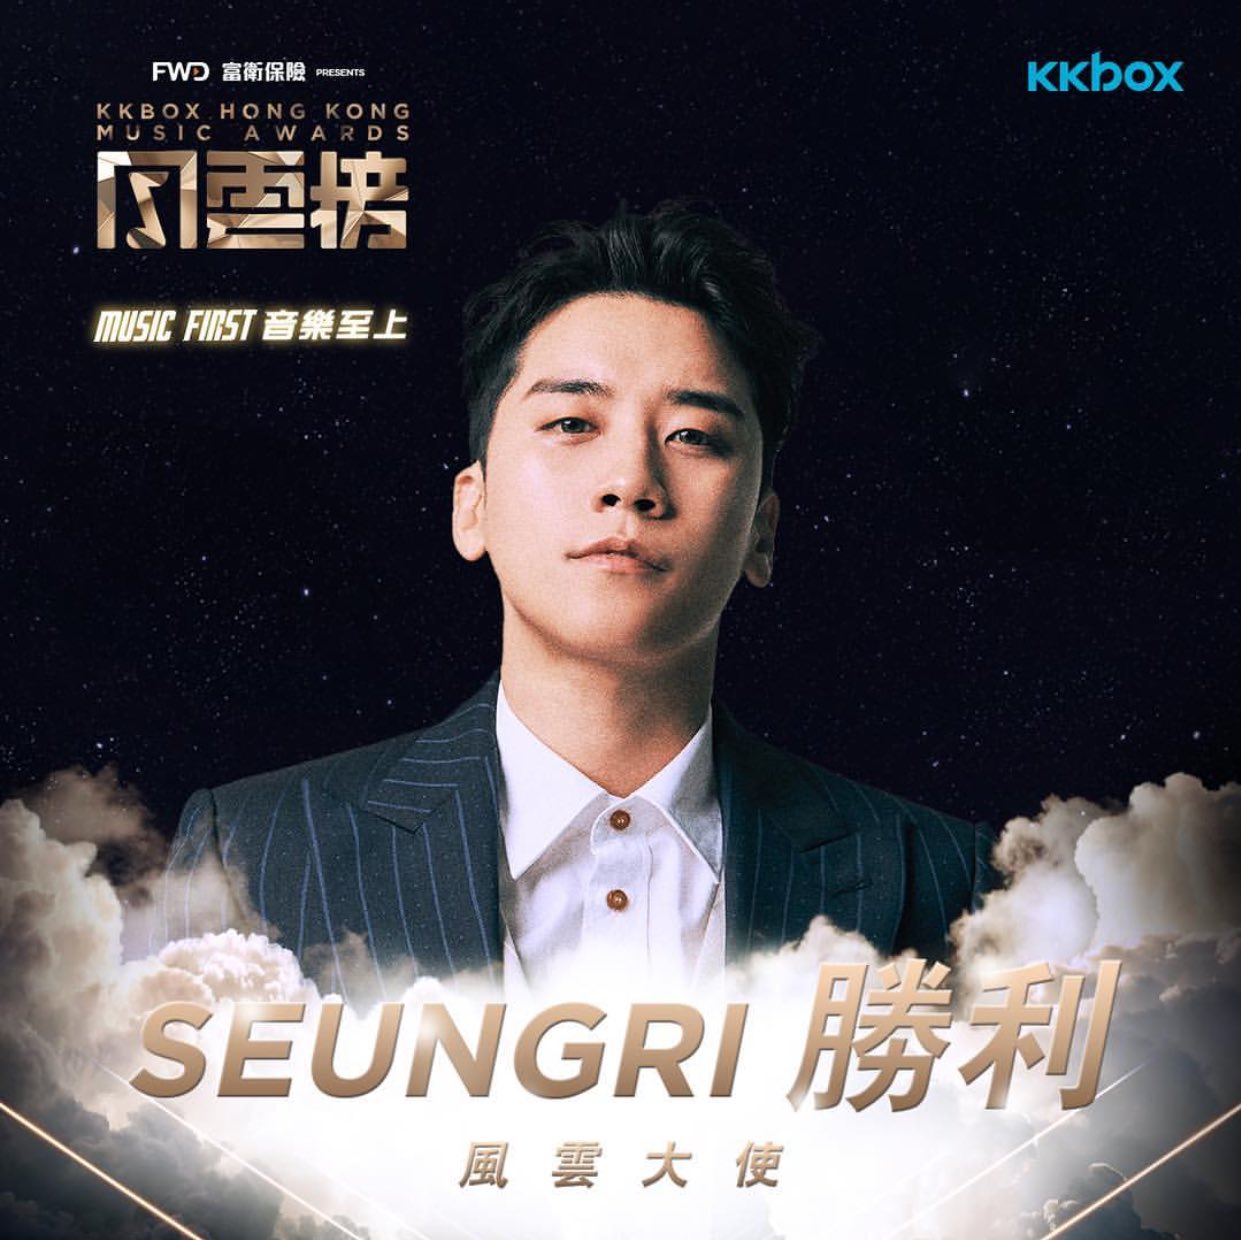 schedule-seungri-to-participate-at-xxxkkbox-hong-kong-music-awardsxxxin-hong-kong-on-march-12-2019